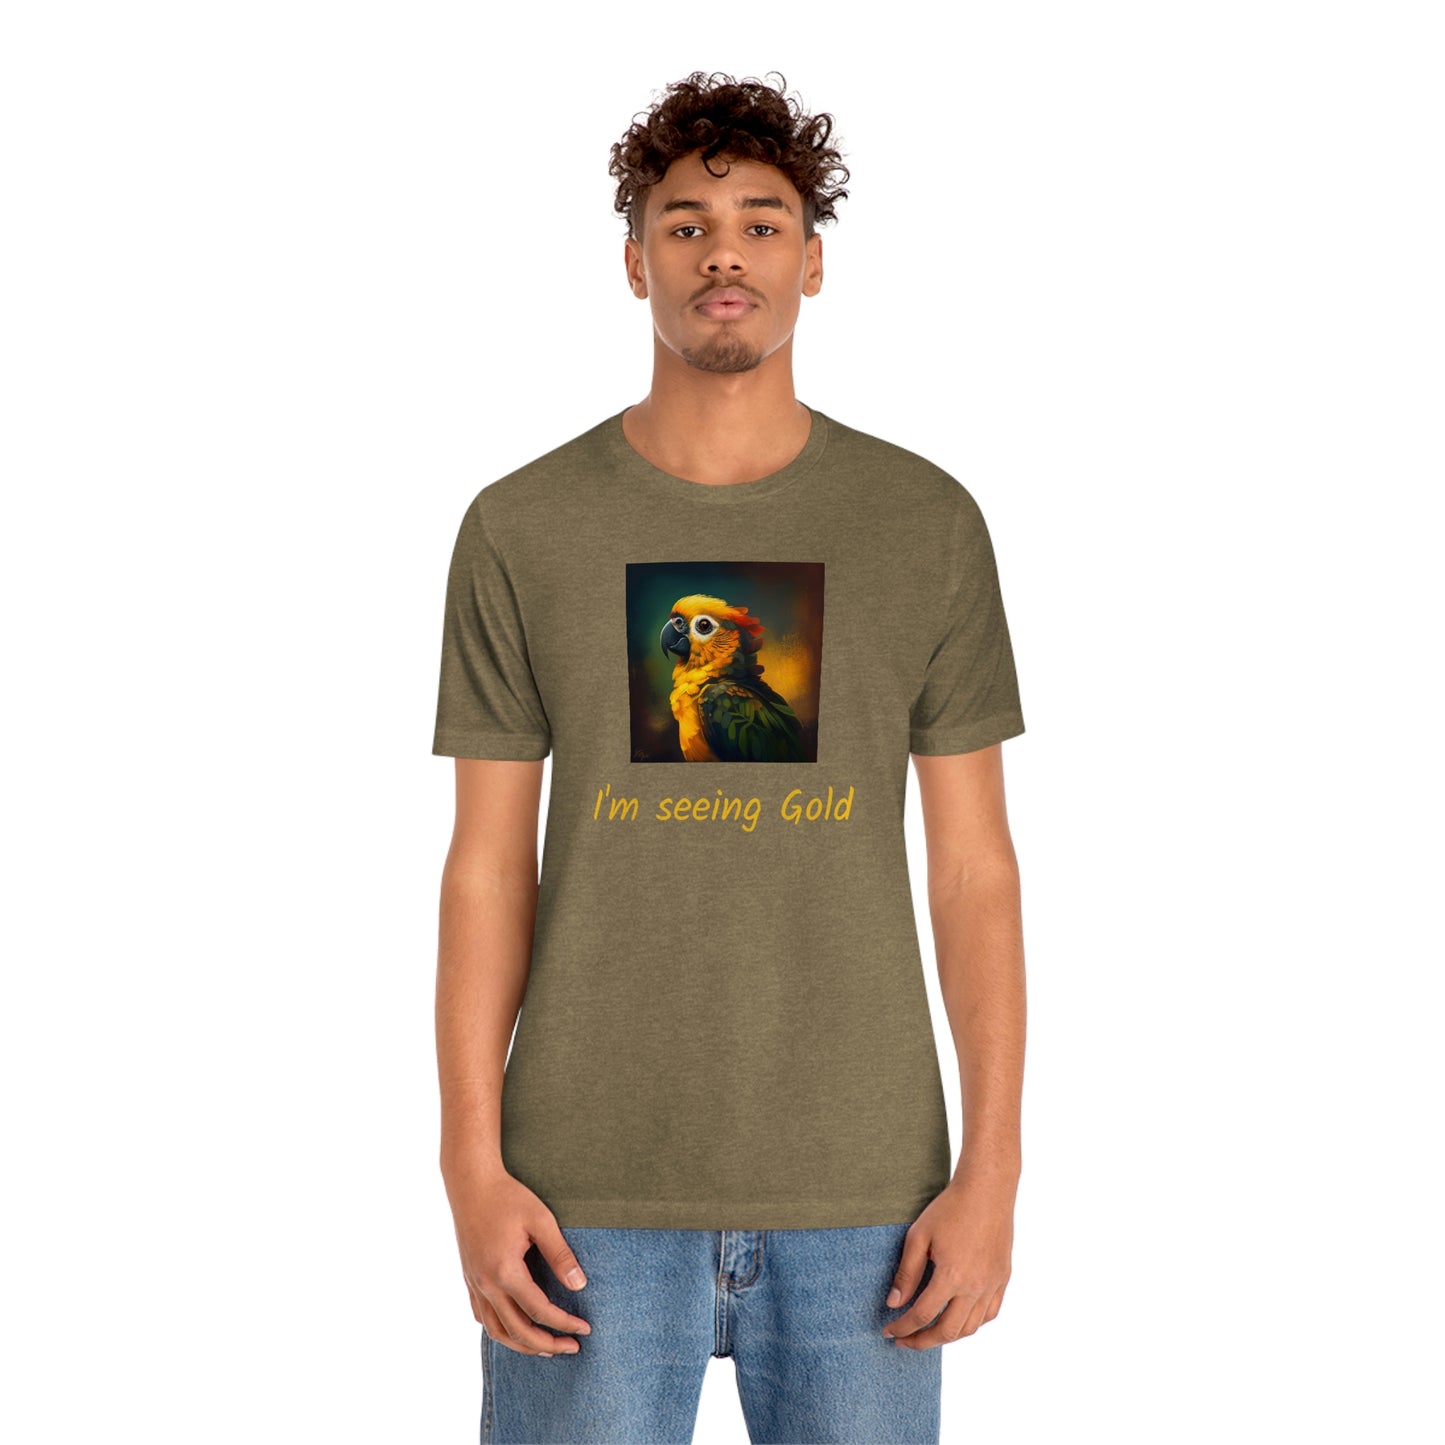 I see in Golden - Jersey Short Sleeve Tee